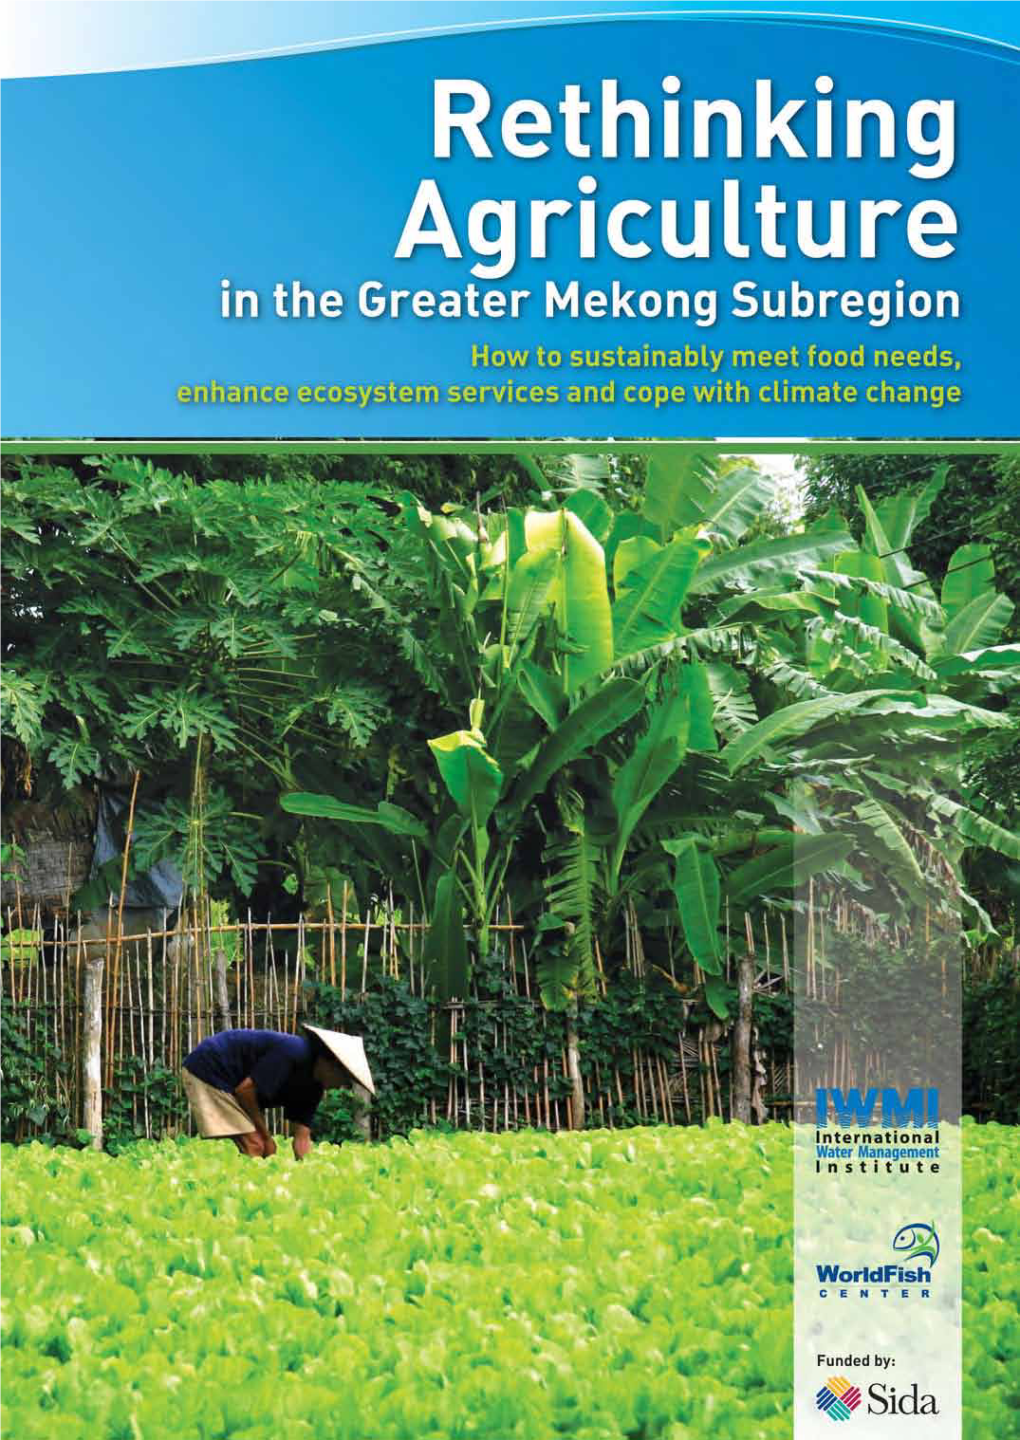 Rethinking Agriculture in the Greater Mekong Subregion: How to Sustainably Meet Food Needs, Enhance Ecosystem Services and Cope with Climate Change